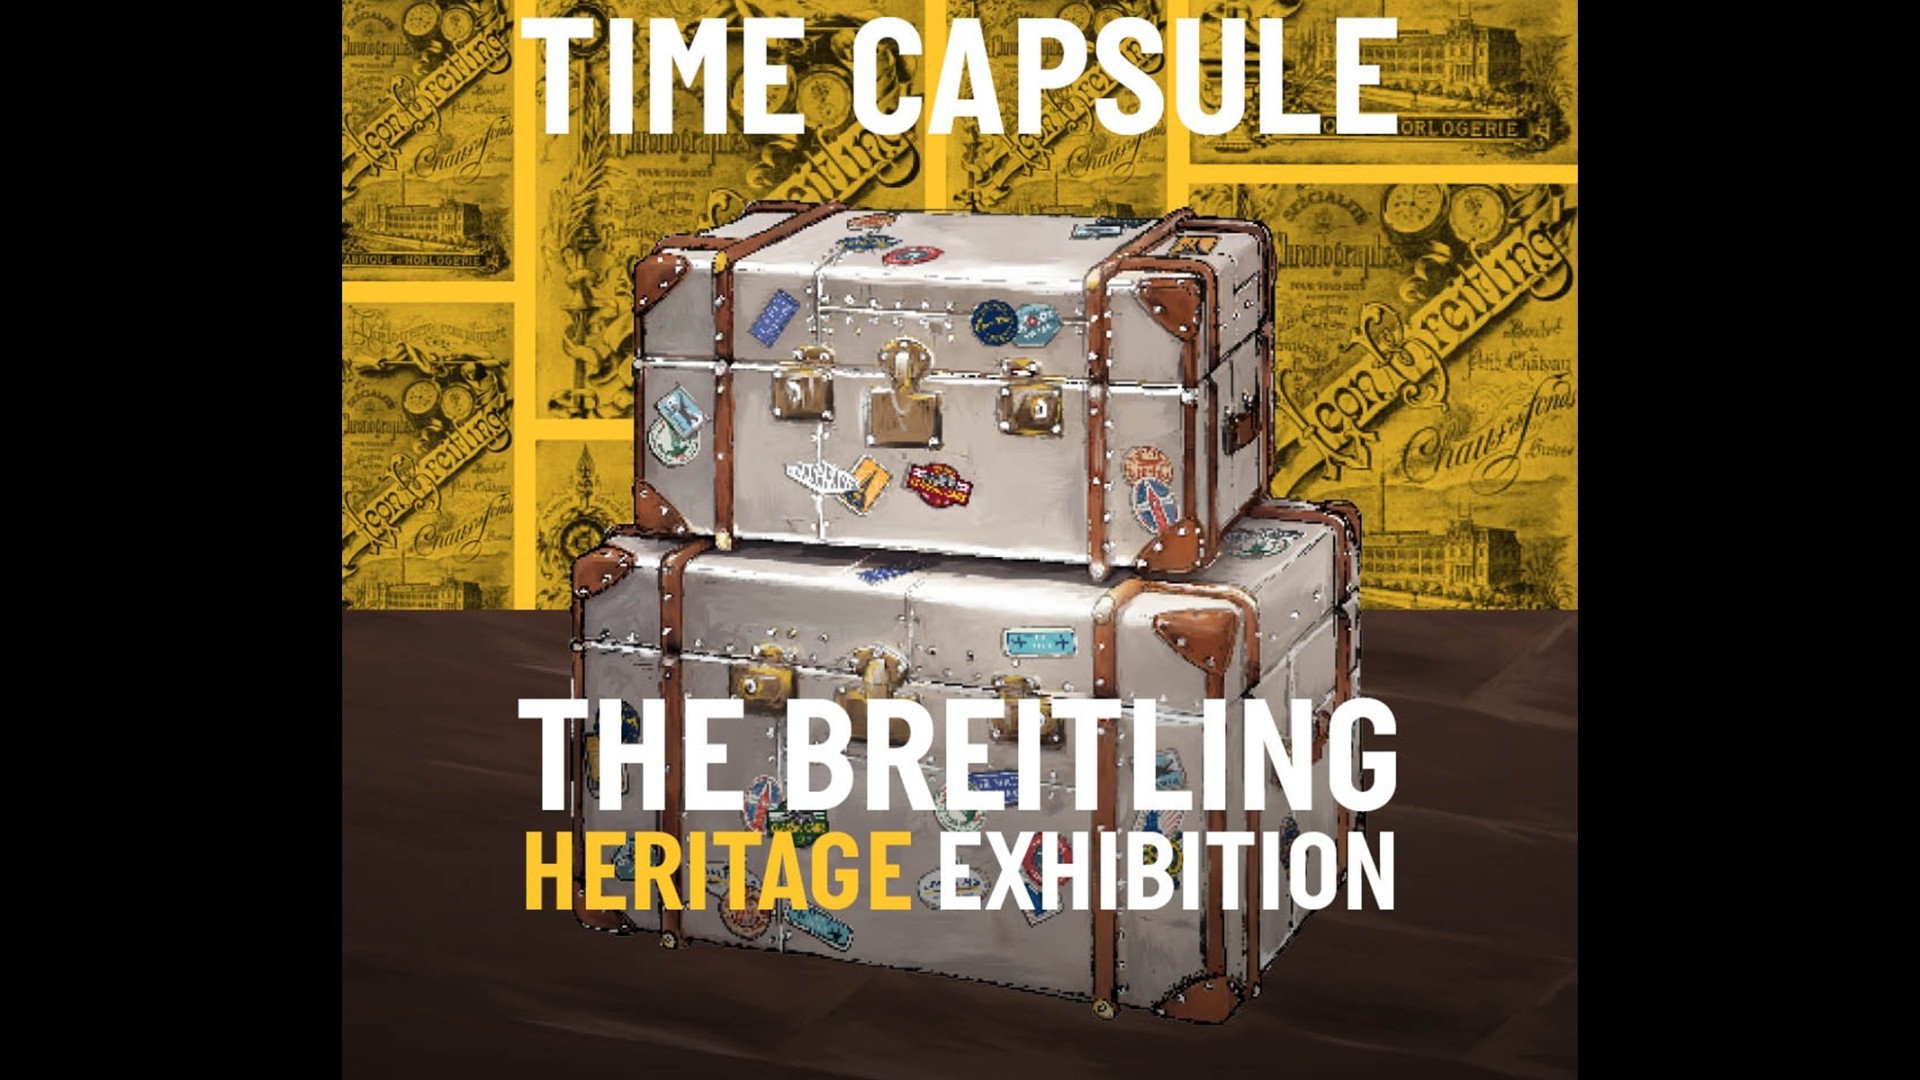 Breitling to hold 140th anniversary traveling exhibition at Otomesando & Osaka boutiques